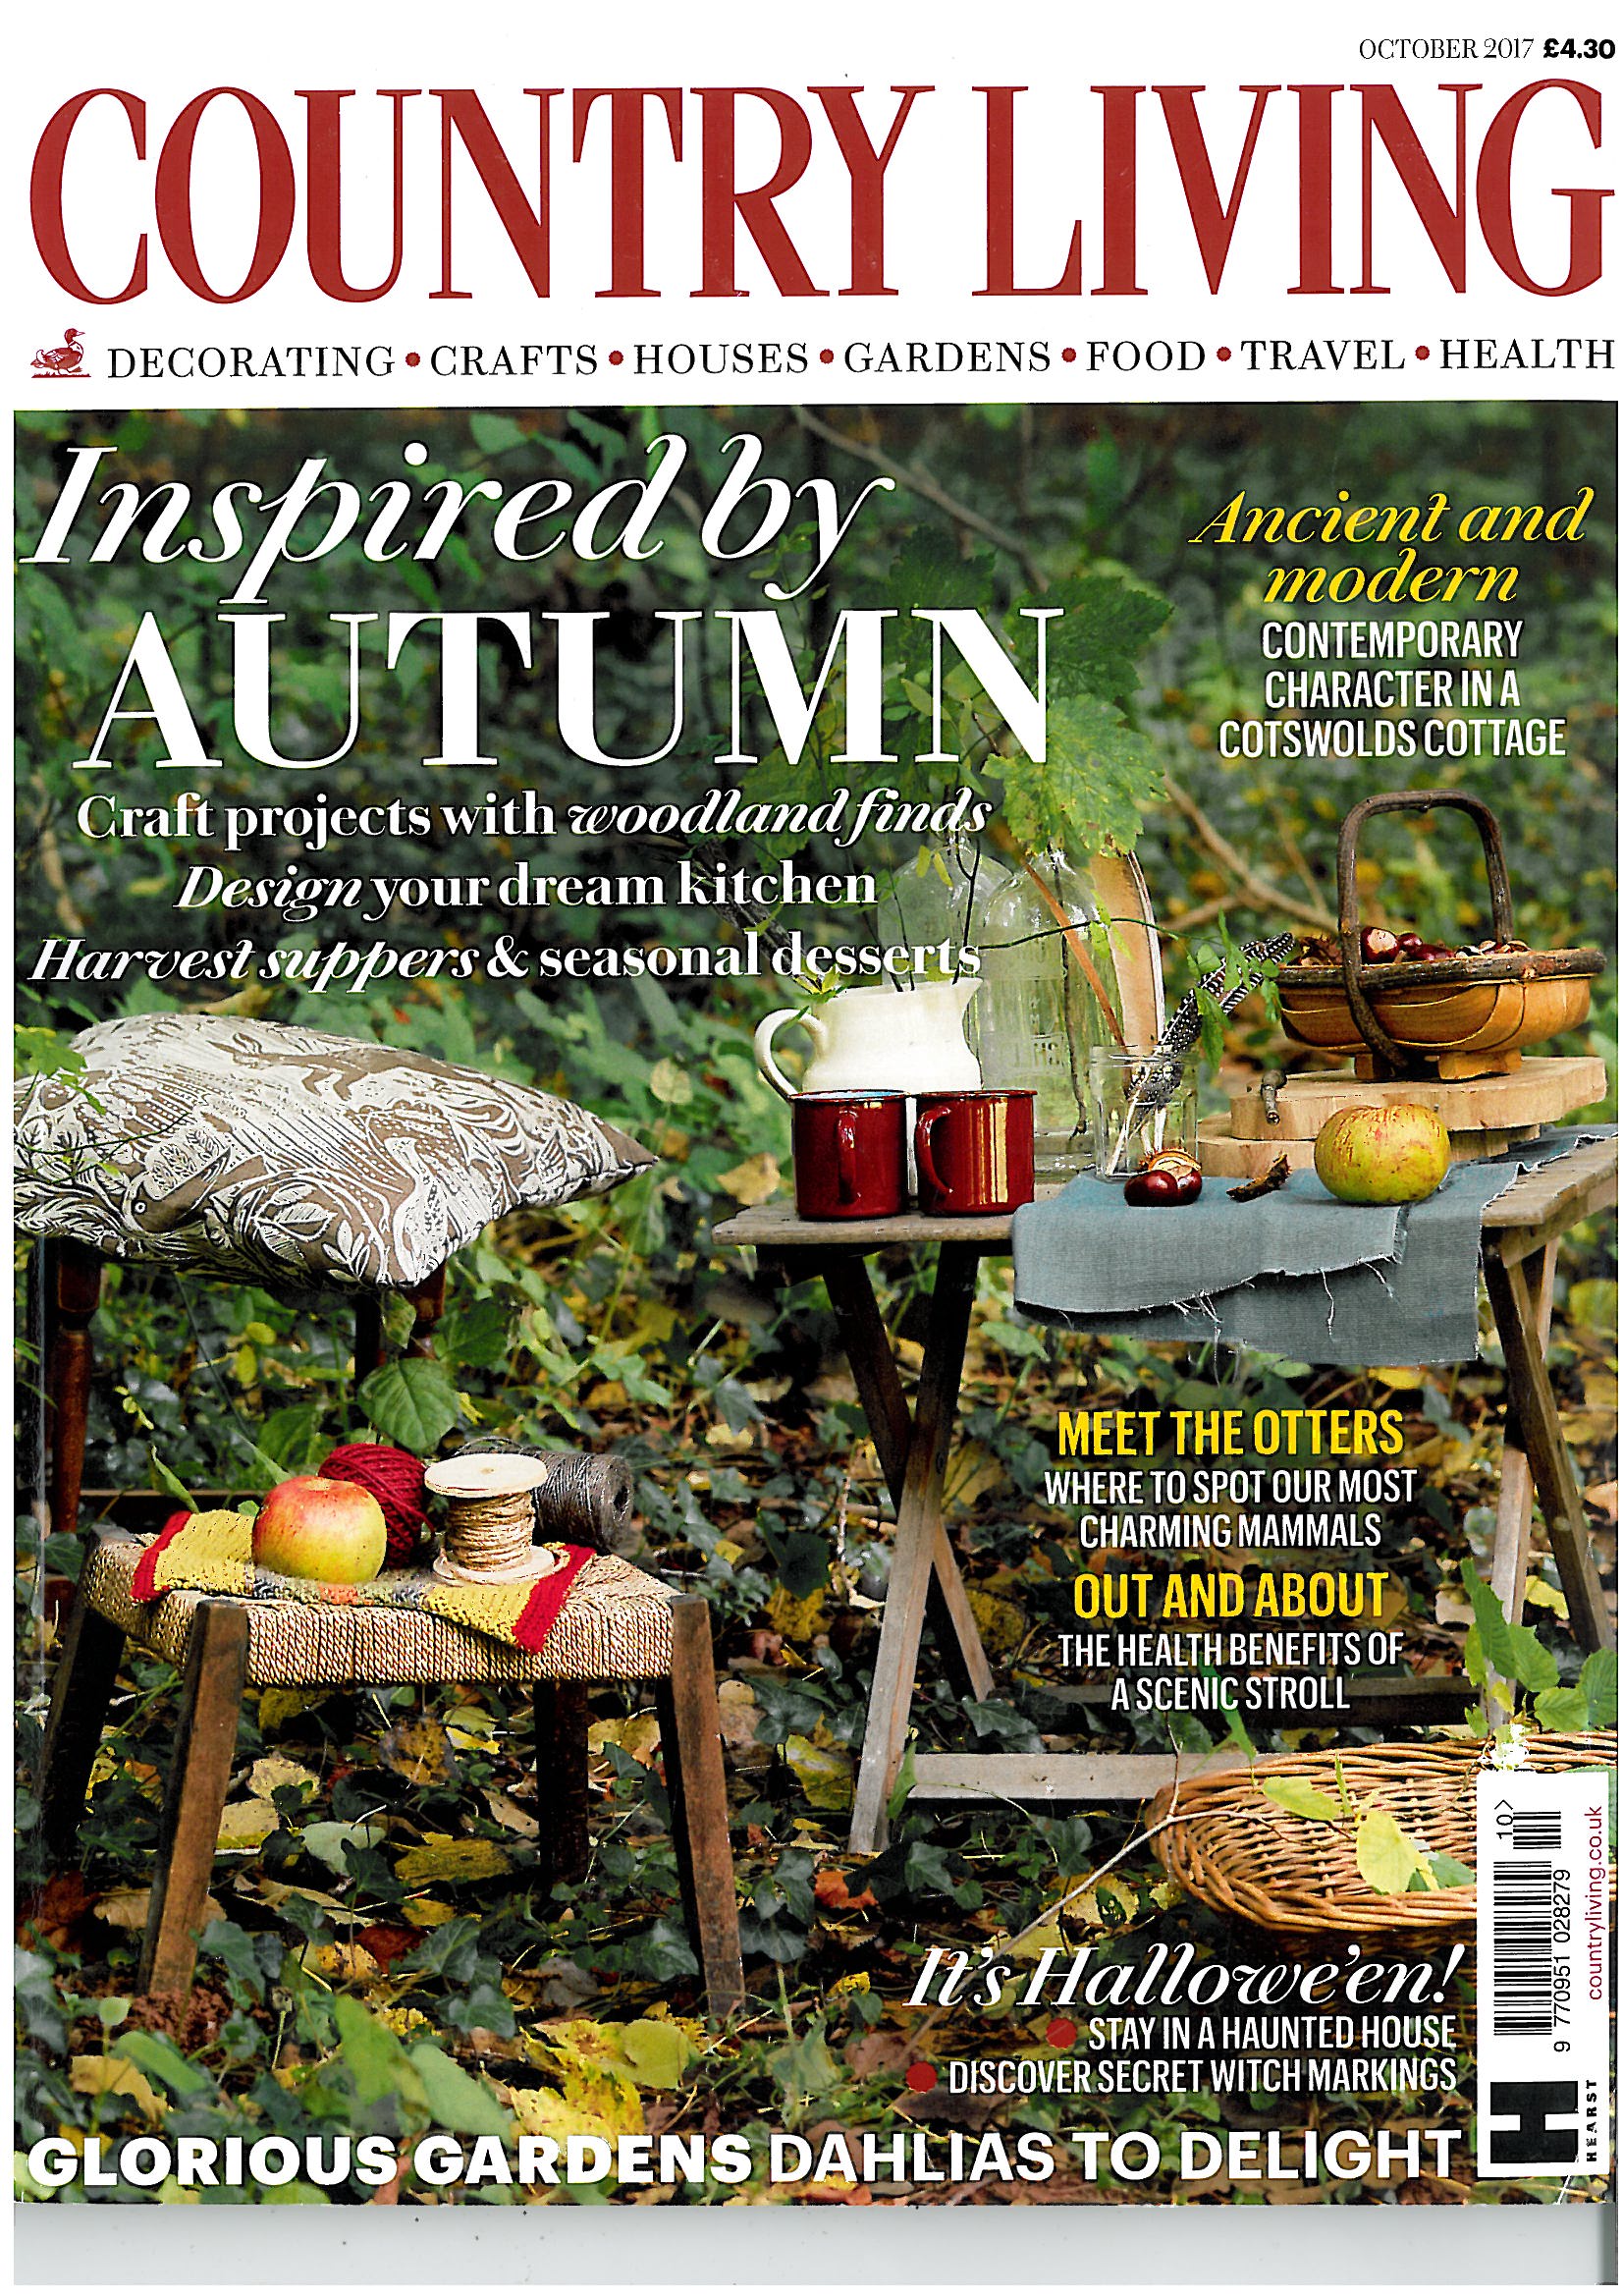 Image of Country Living magazine article about garden design